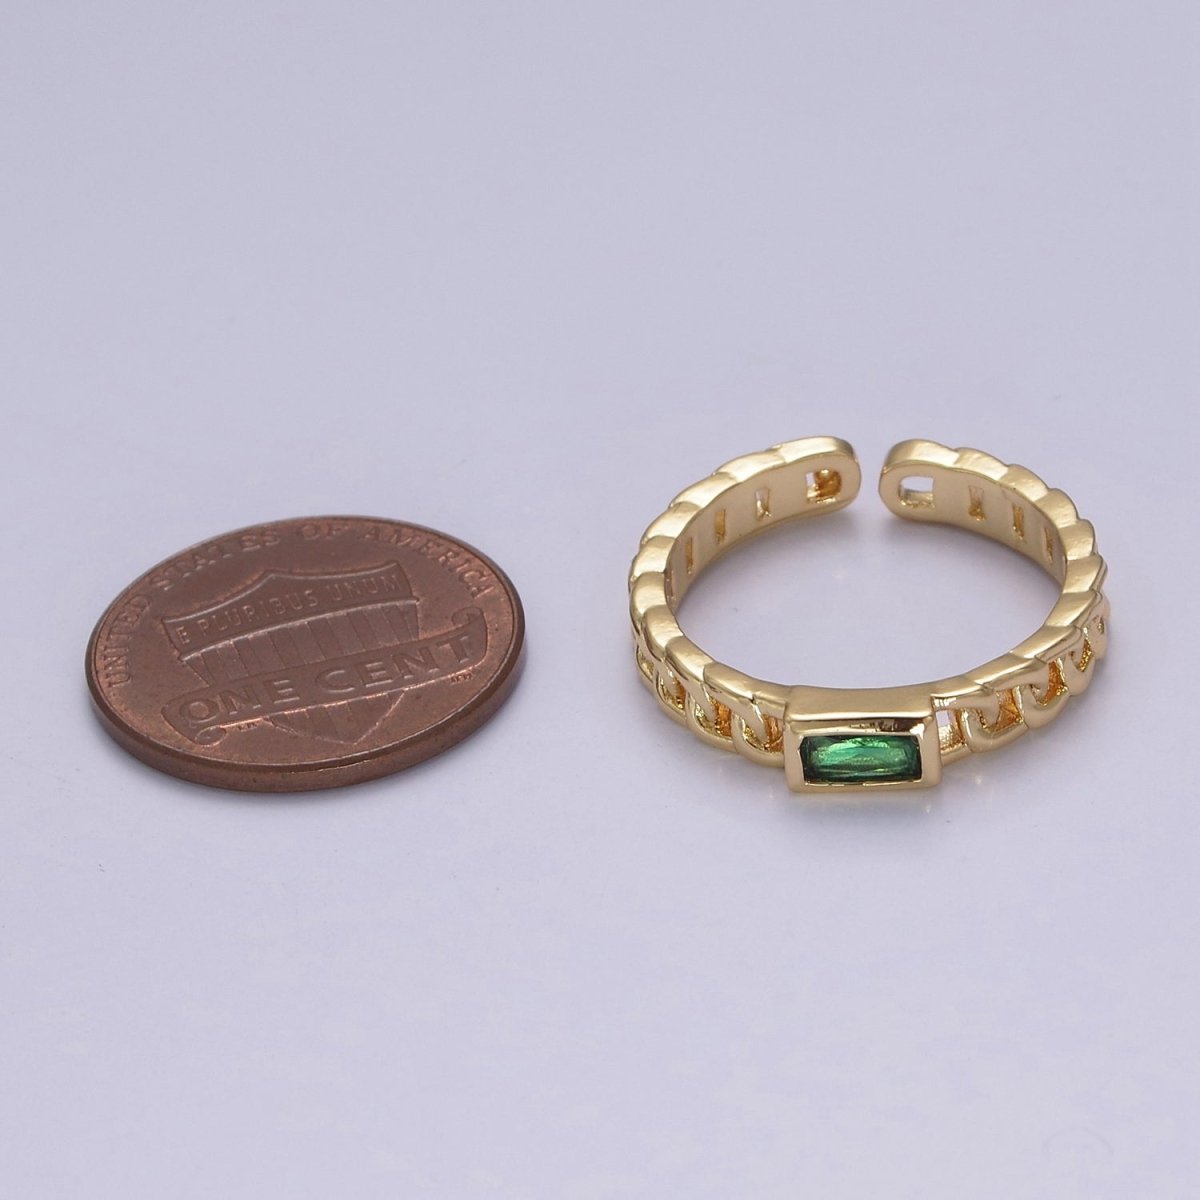 Dainty Chain Link Gold Band Emerald CZ Ring Cubic Zirconia Minimalist Ring Dainty Green CZ Adjustable Ring S-505 - DLUXCA